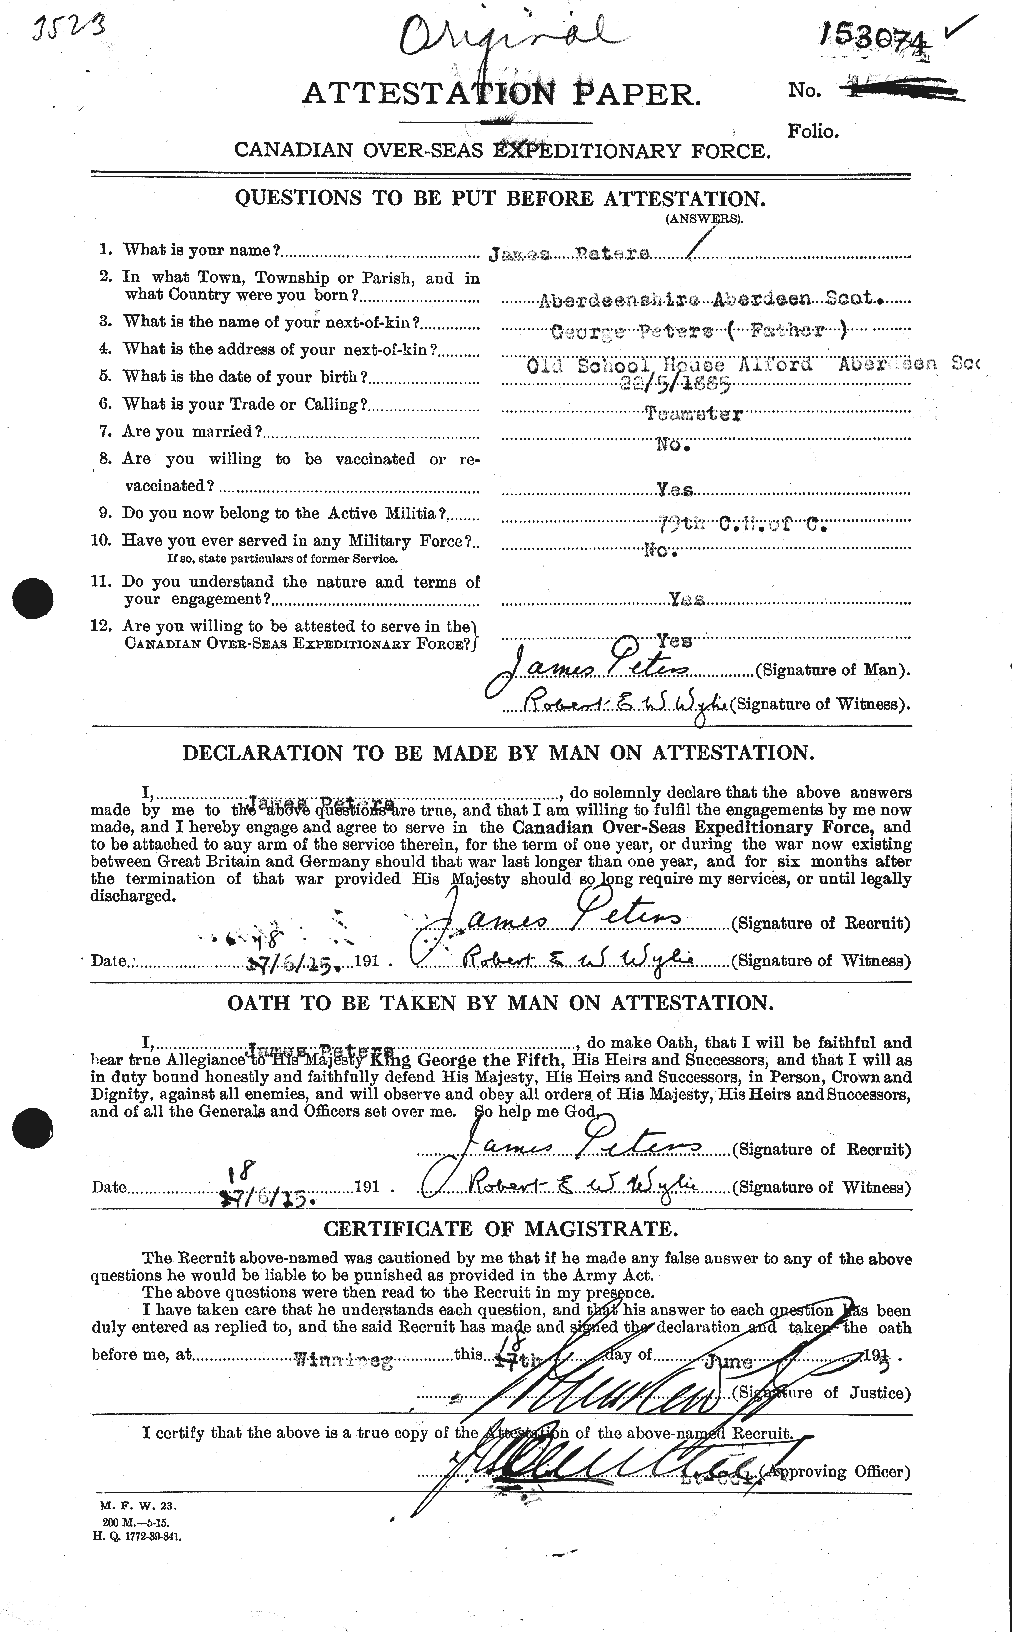 Personnel Records of the First World War - CEF 575516a